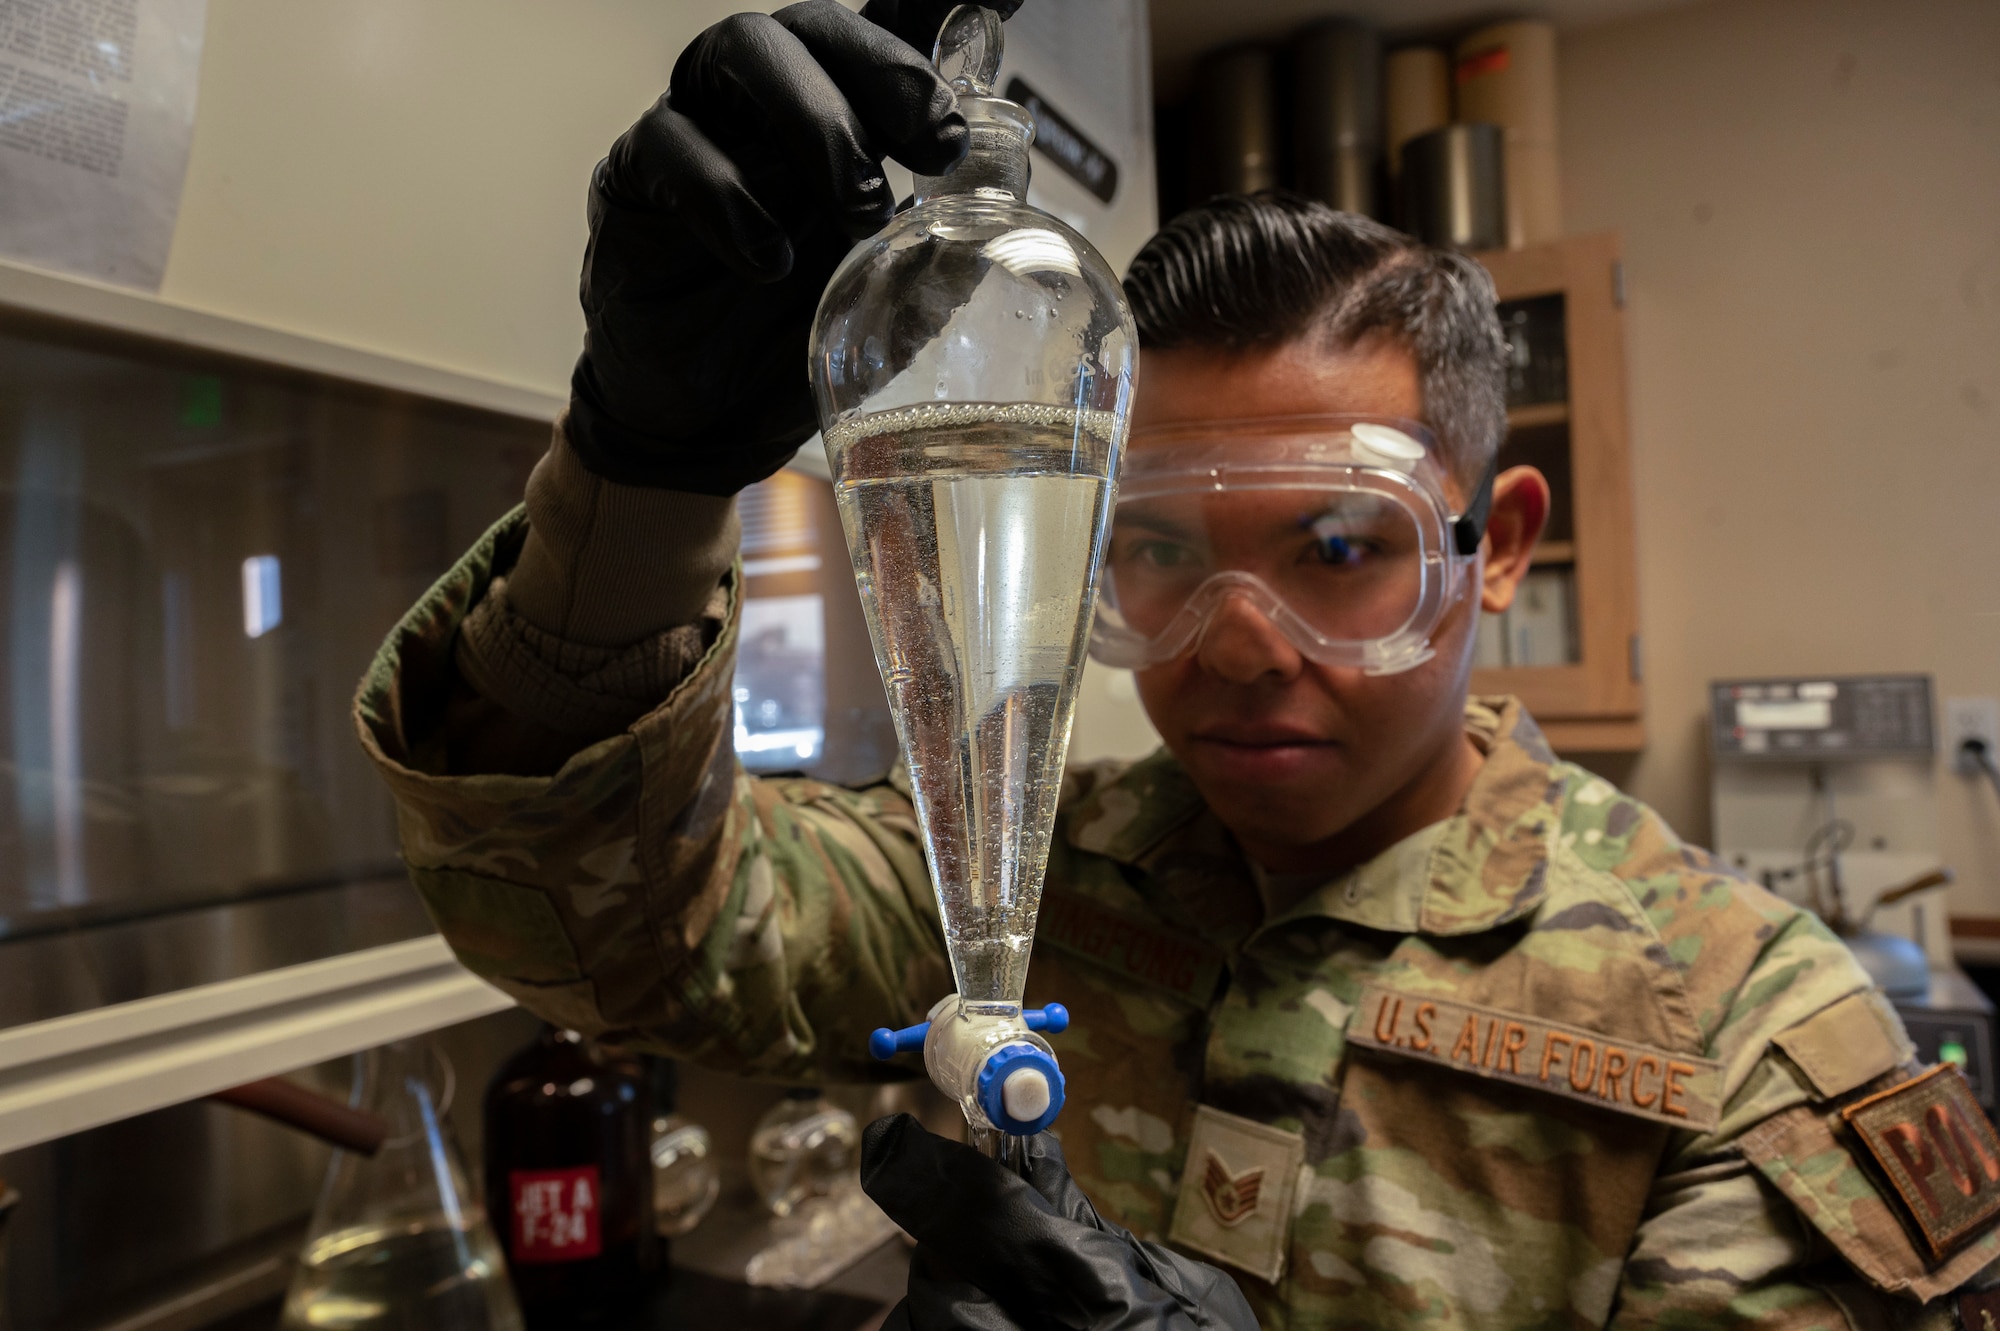 U.S. Air Force Staff Sgt. Austin Taitingfong, 49th Logistics Readiness Squadron fuels laboratory noncommissioned officer in charge, inspects a flask of jet fuel at Holloman Air Force Base, New Mexico, Dec. 12, 2022. The 49th LRS fuels laboratory is the first line of defense for fuel quality control for all organizations on base. (U.S. Air Force photo by Airman 1st Class Isaiah Pedrazzini)